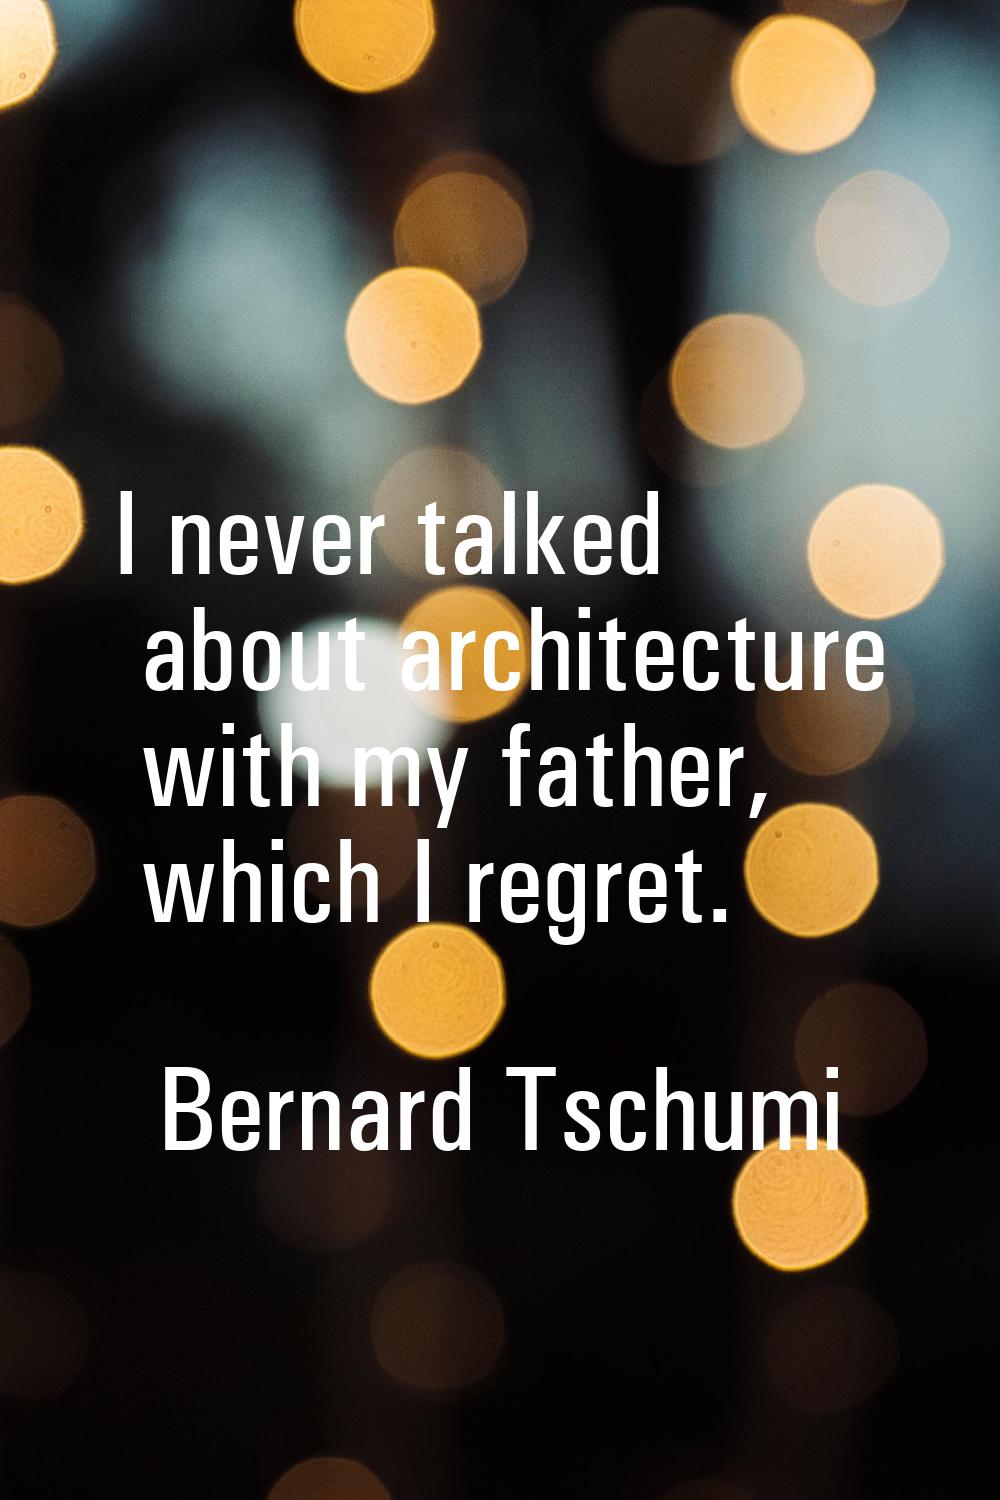 I never talked about architecture with my father, which I regret.